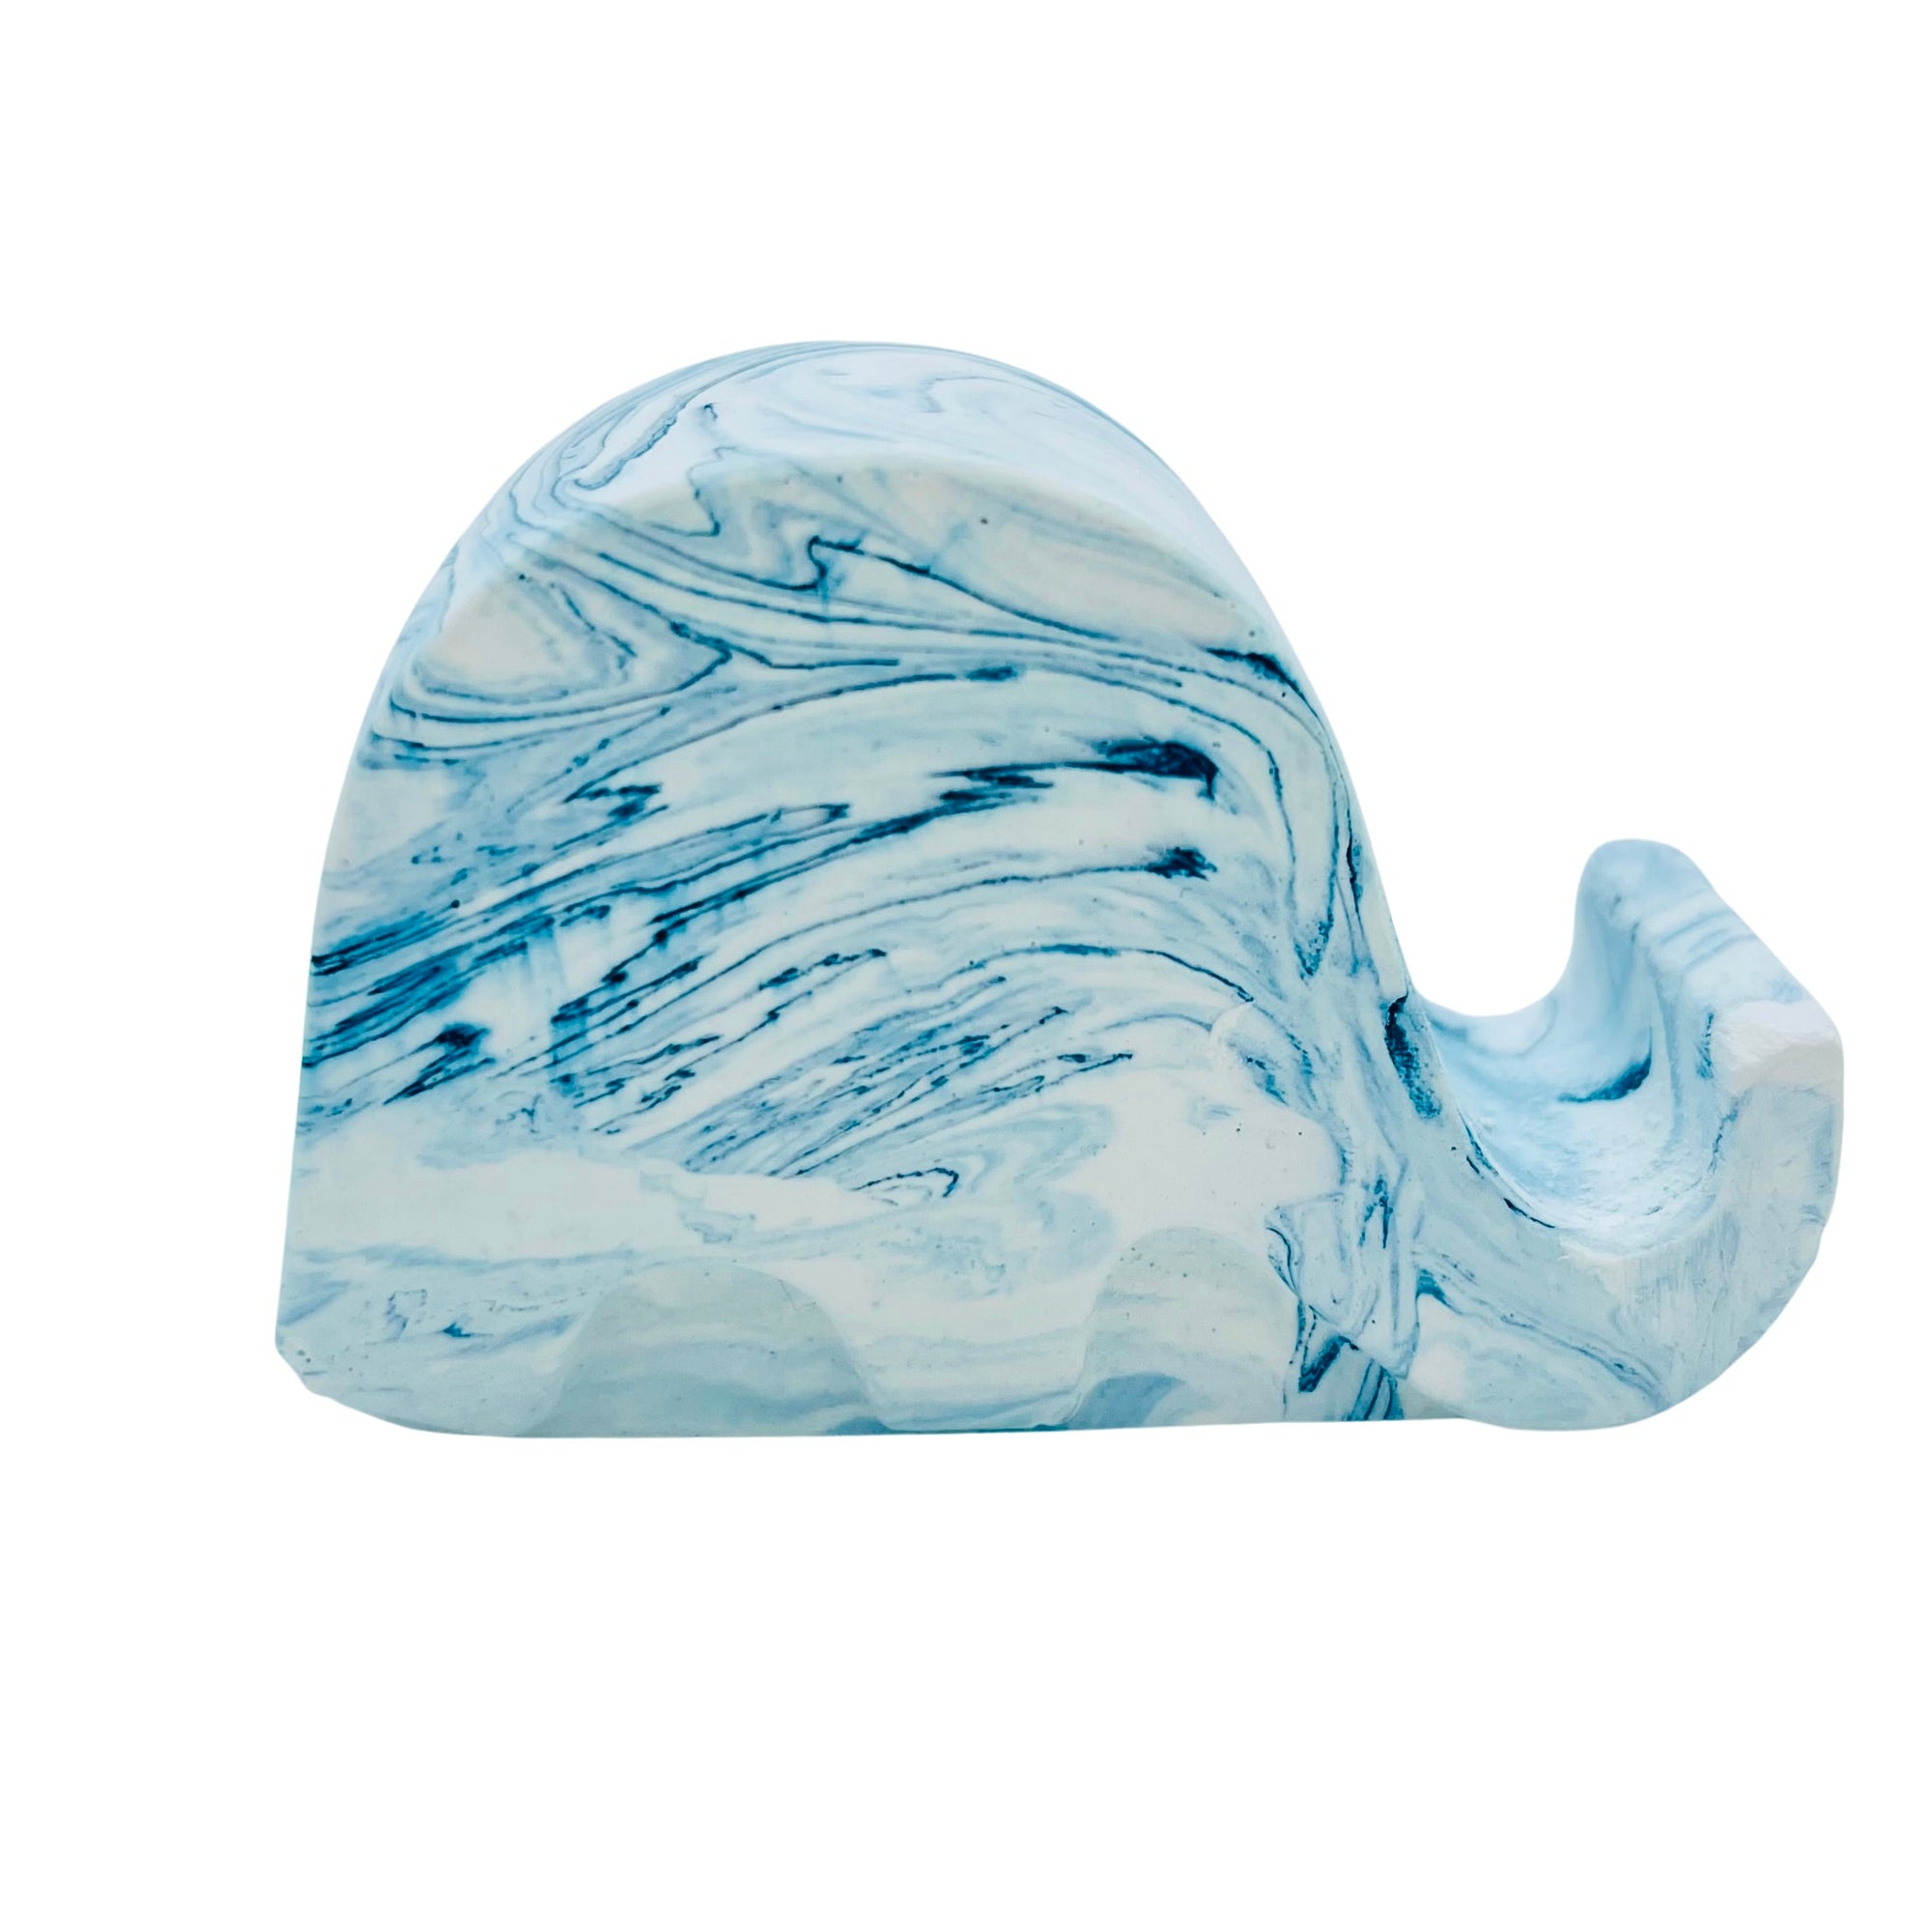 A Jesmonite elephant mobile phone stand measuring 6.5cm in length marbled with blue lagoon pigment.